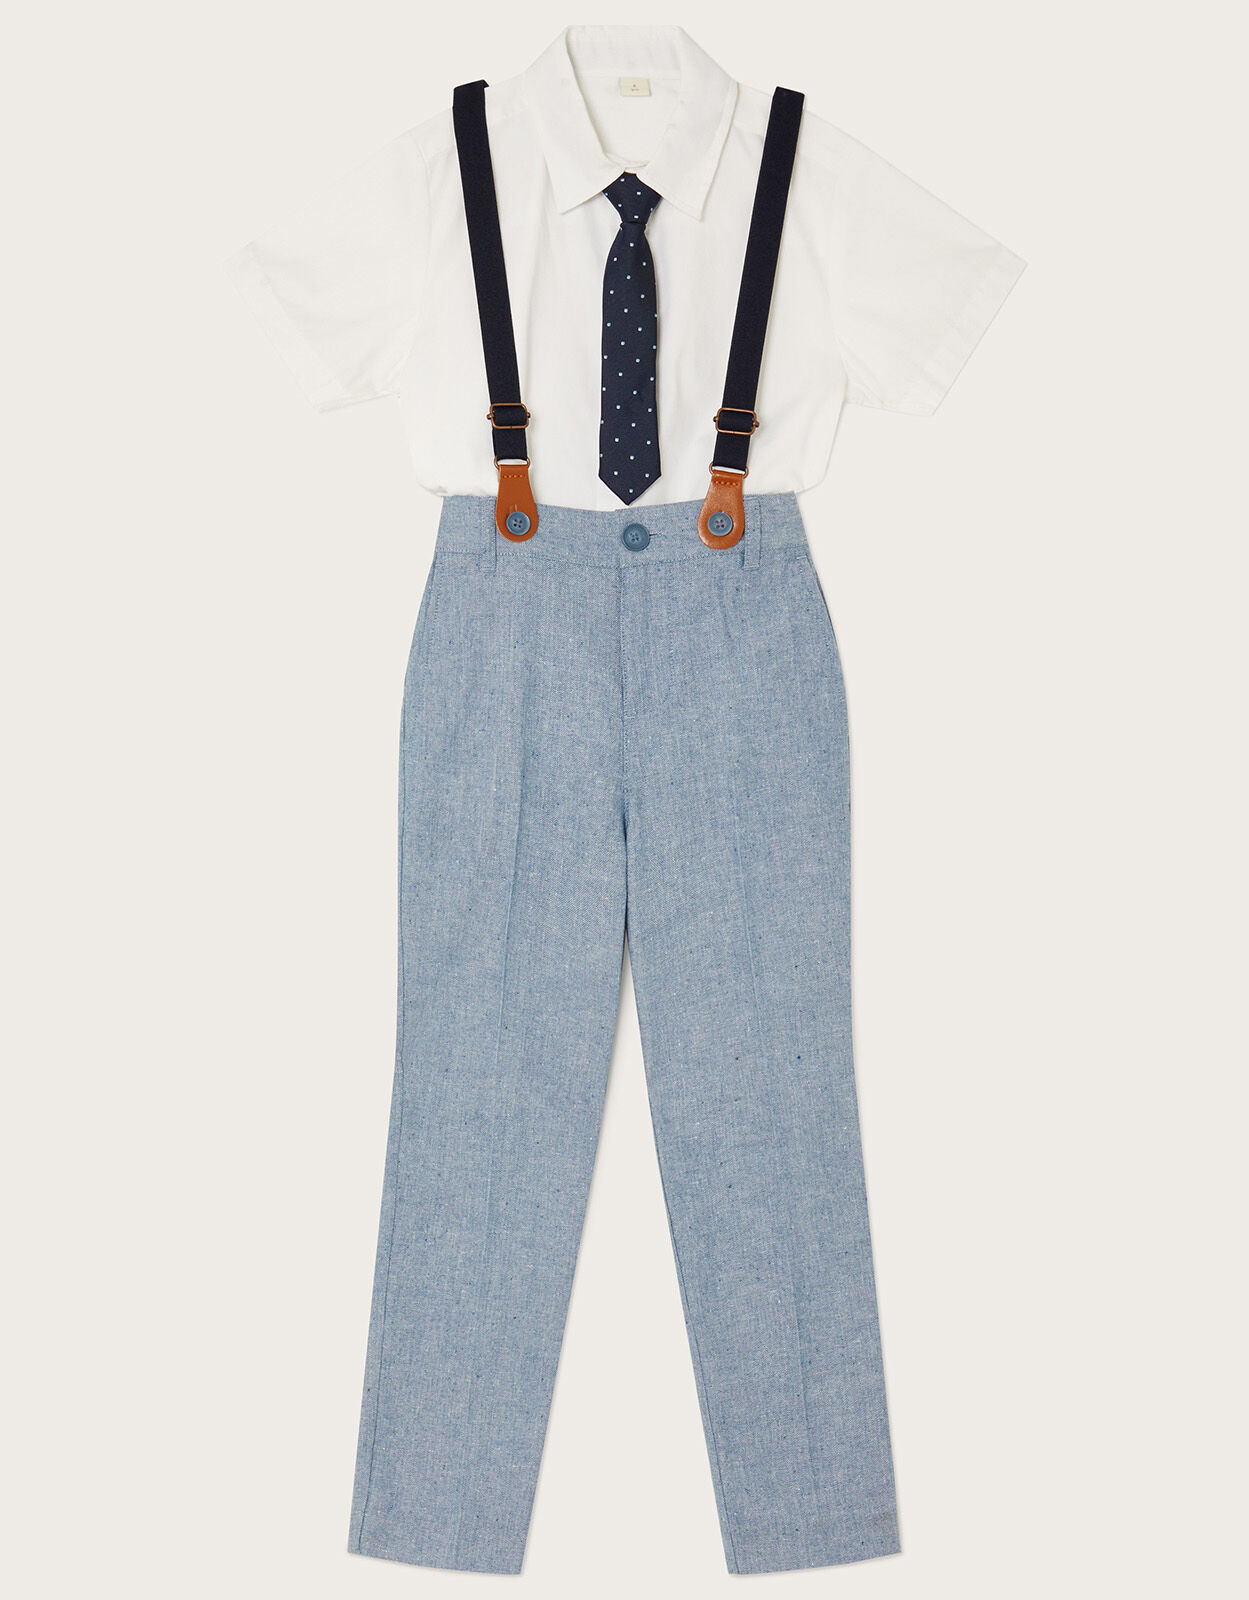 How to Wear Suspenders and Why Theyre Great for Shorter Men